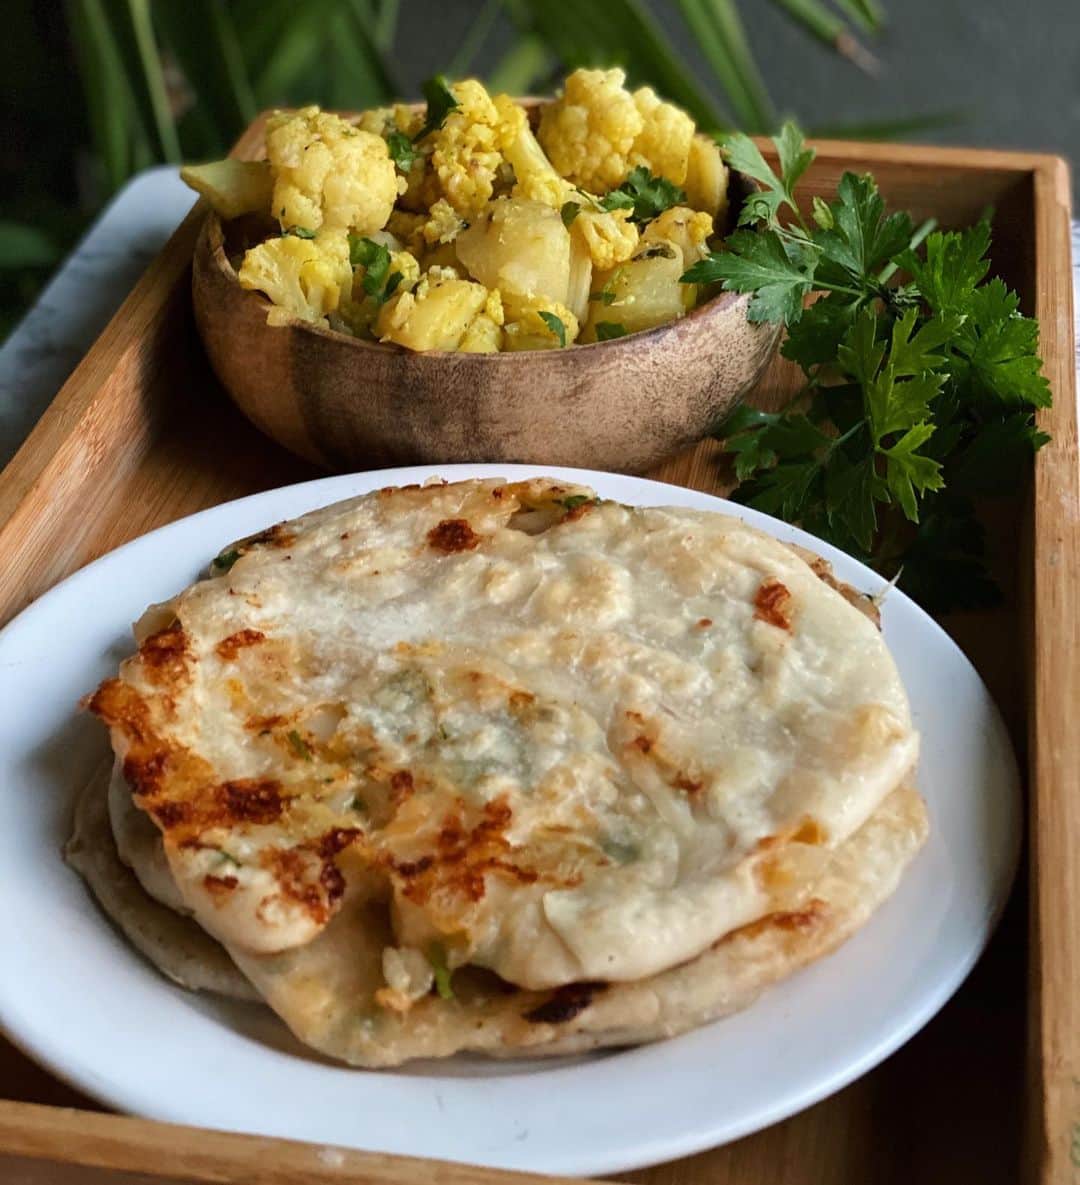 Antonietteのインスタグラム：「Aloo-ve Indian food! Aloo gobi (spiced cauliflower and potatoes) accompanied with cheese, onion and chili parathas. So good! Trust me, you’ll  want to make the parathas, and you can omit the cheese if you want to make it vegan. Perfect for #meatlessmonday ! . . . . Cheese, onion and chili paratha   Dough : * 1.5 cups flour * 1/4 teaspoon salt * 1 teaspoon oil  Filling: * 1 small onion, finely chopped * 1 jalapeño or other green chili chopped * Cup of cilantro chopped * 1/2 cup of the following cheeses: mozzarella, cheddar, paneer but can use what you have available.  * 1/2 teaspoon chili powder * Pinch of salt * 4 teaspoons melted butter, ghee or oil   Make dough by combining flour, salt, and oil and slowly add 1/3 cup water to make a soft dough. Add a little more to make it pliable. Knead for about a minute or two and then  have the dough rest for ~30 mins.   Combine all ingredients for filling and set aside.  Once dough is rested, divide equally into 4 portions, and roll into a 3-4 inch circle. Add some filling, pinch to seal and roll it out into a larger circle, about 6-7 inches.   Repeat the process for all the other dough portions.   Cook paratha in a heated skillet brushed on with a bit of butter, ghee or oil  until golden and crispy. Eat it of course! 😆」